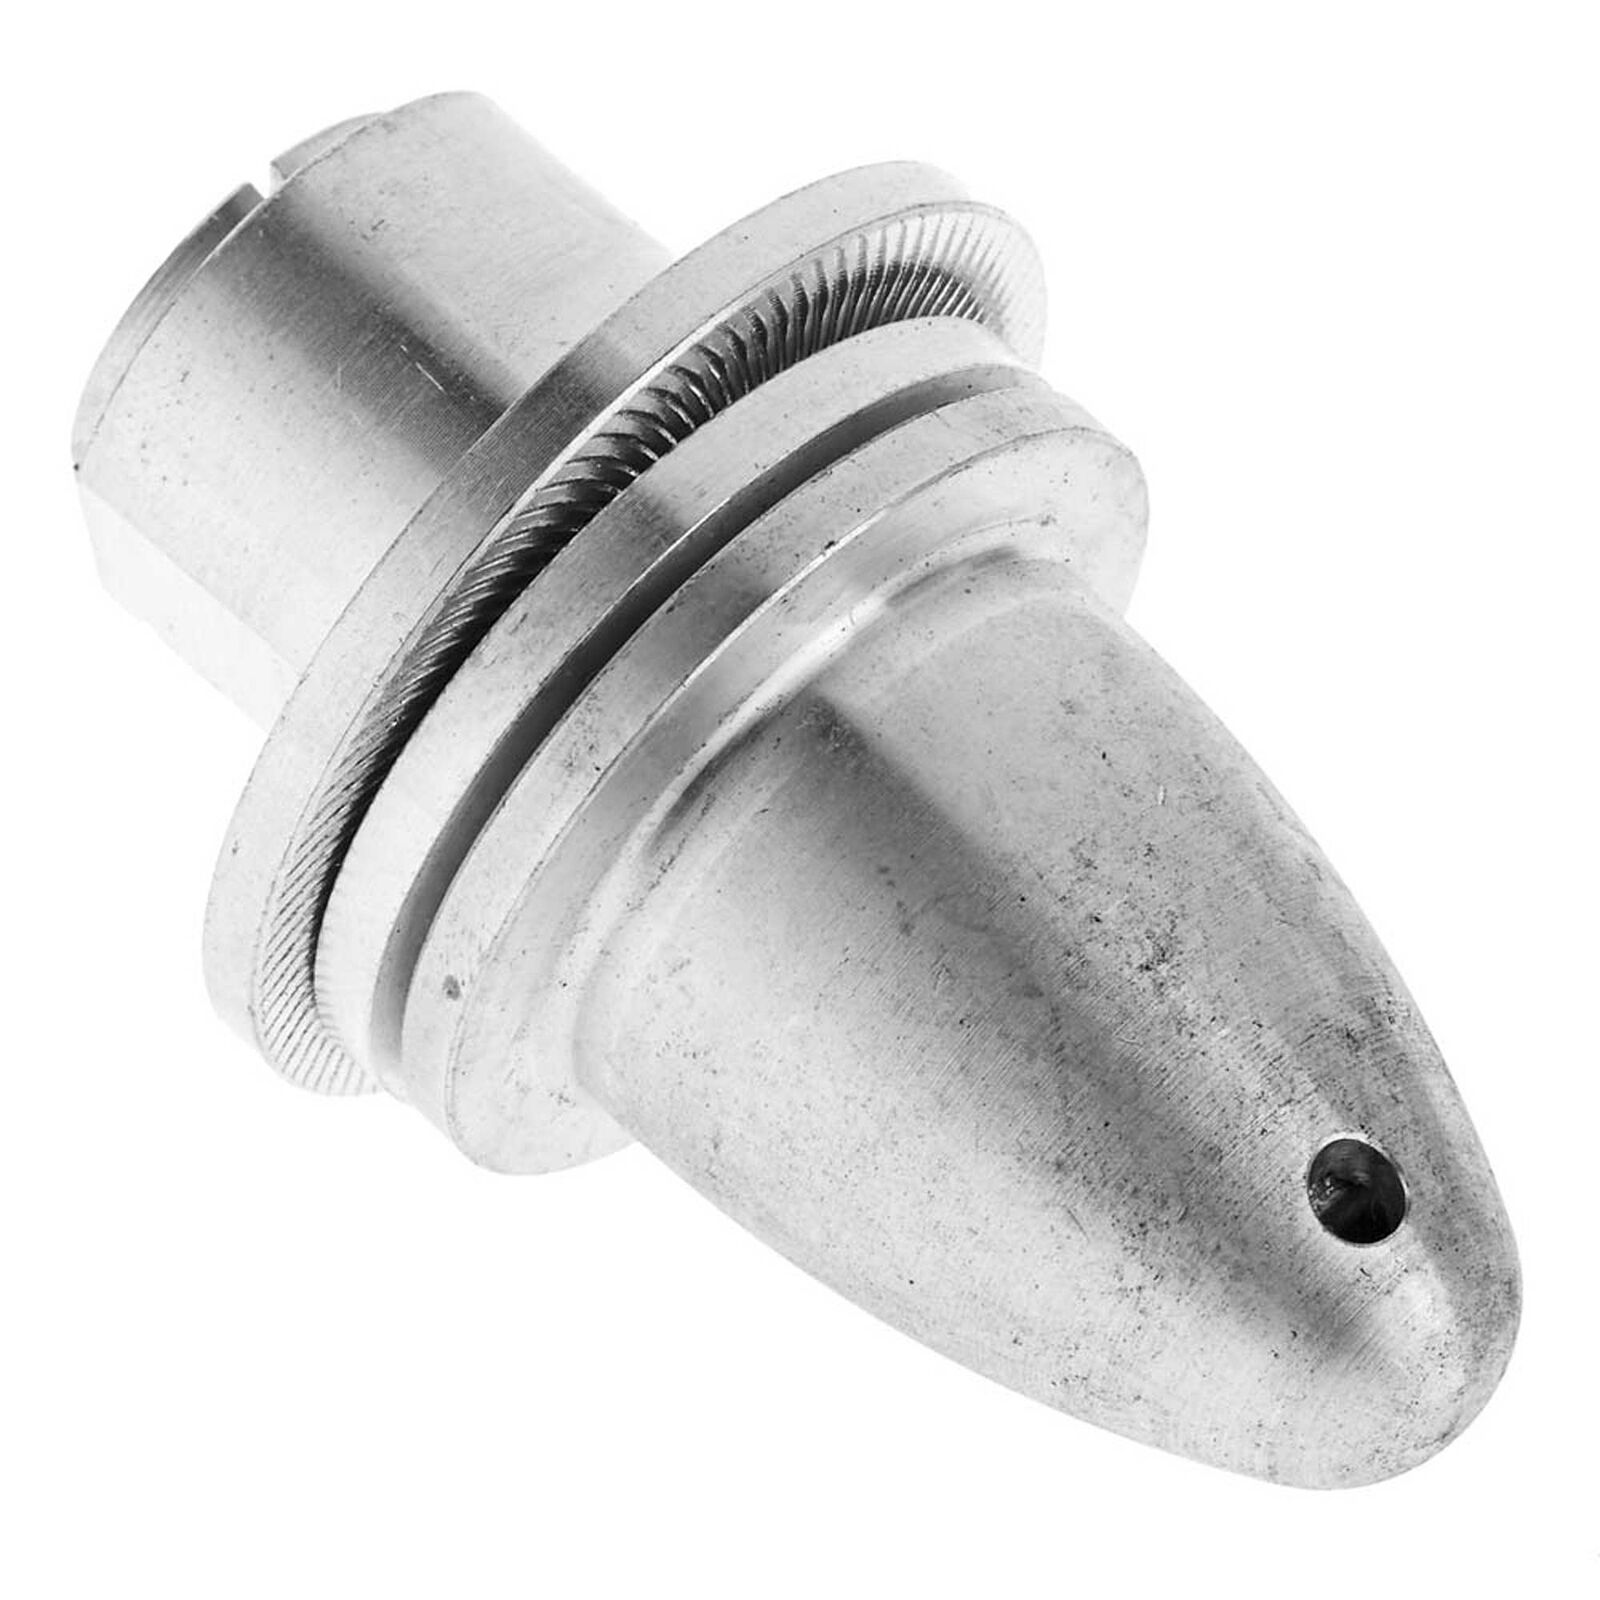 Collet Cone Adapter 8mm-3 8x24 Prop Shaft